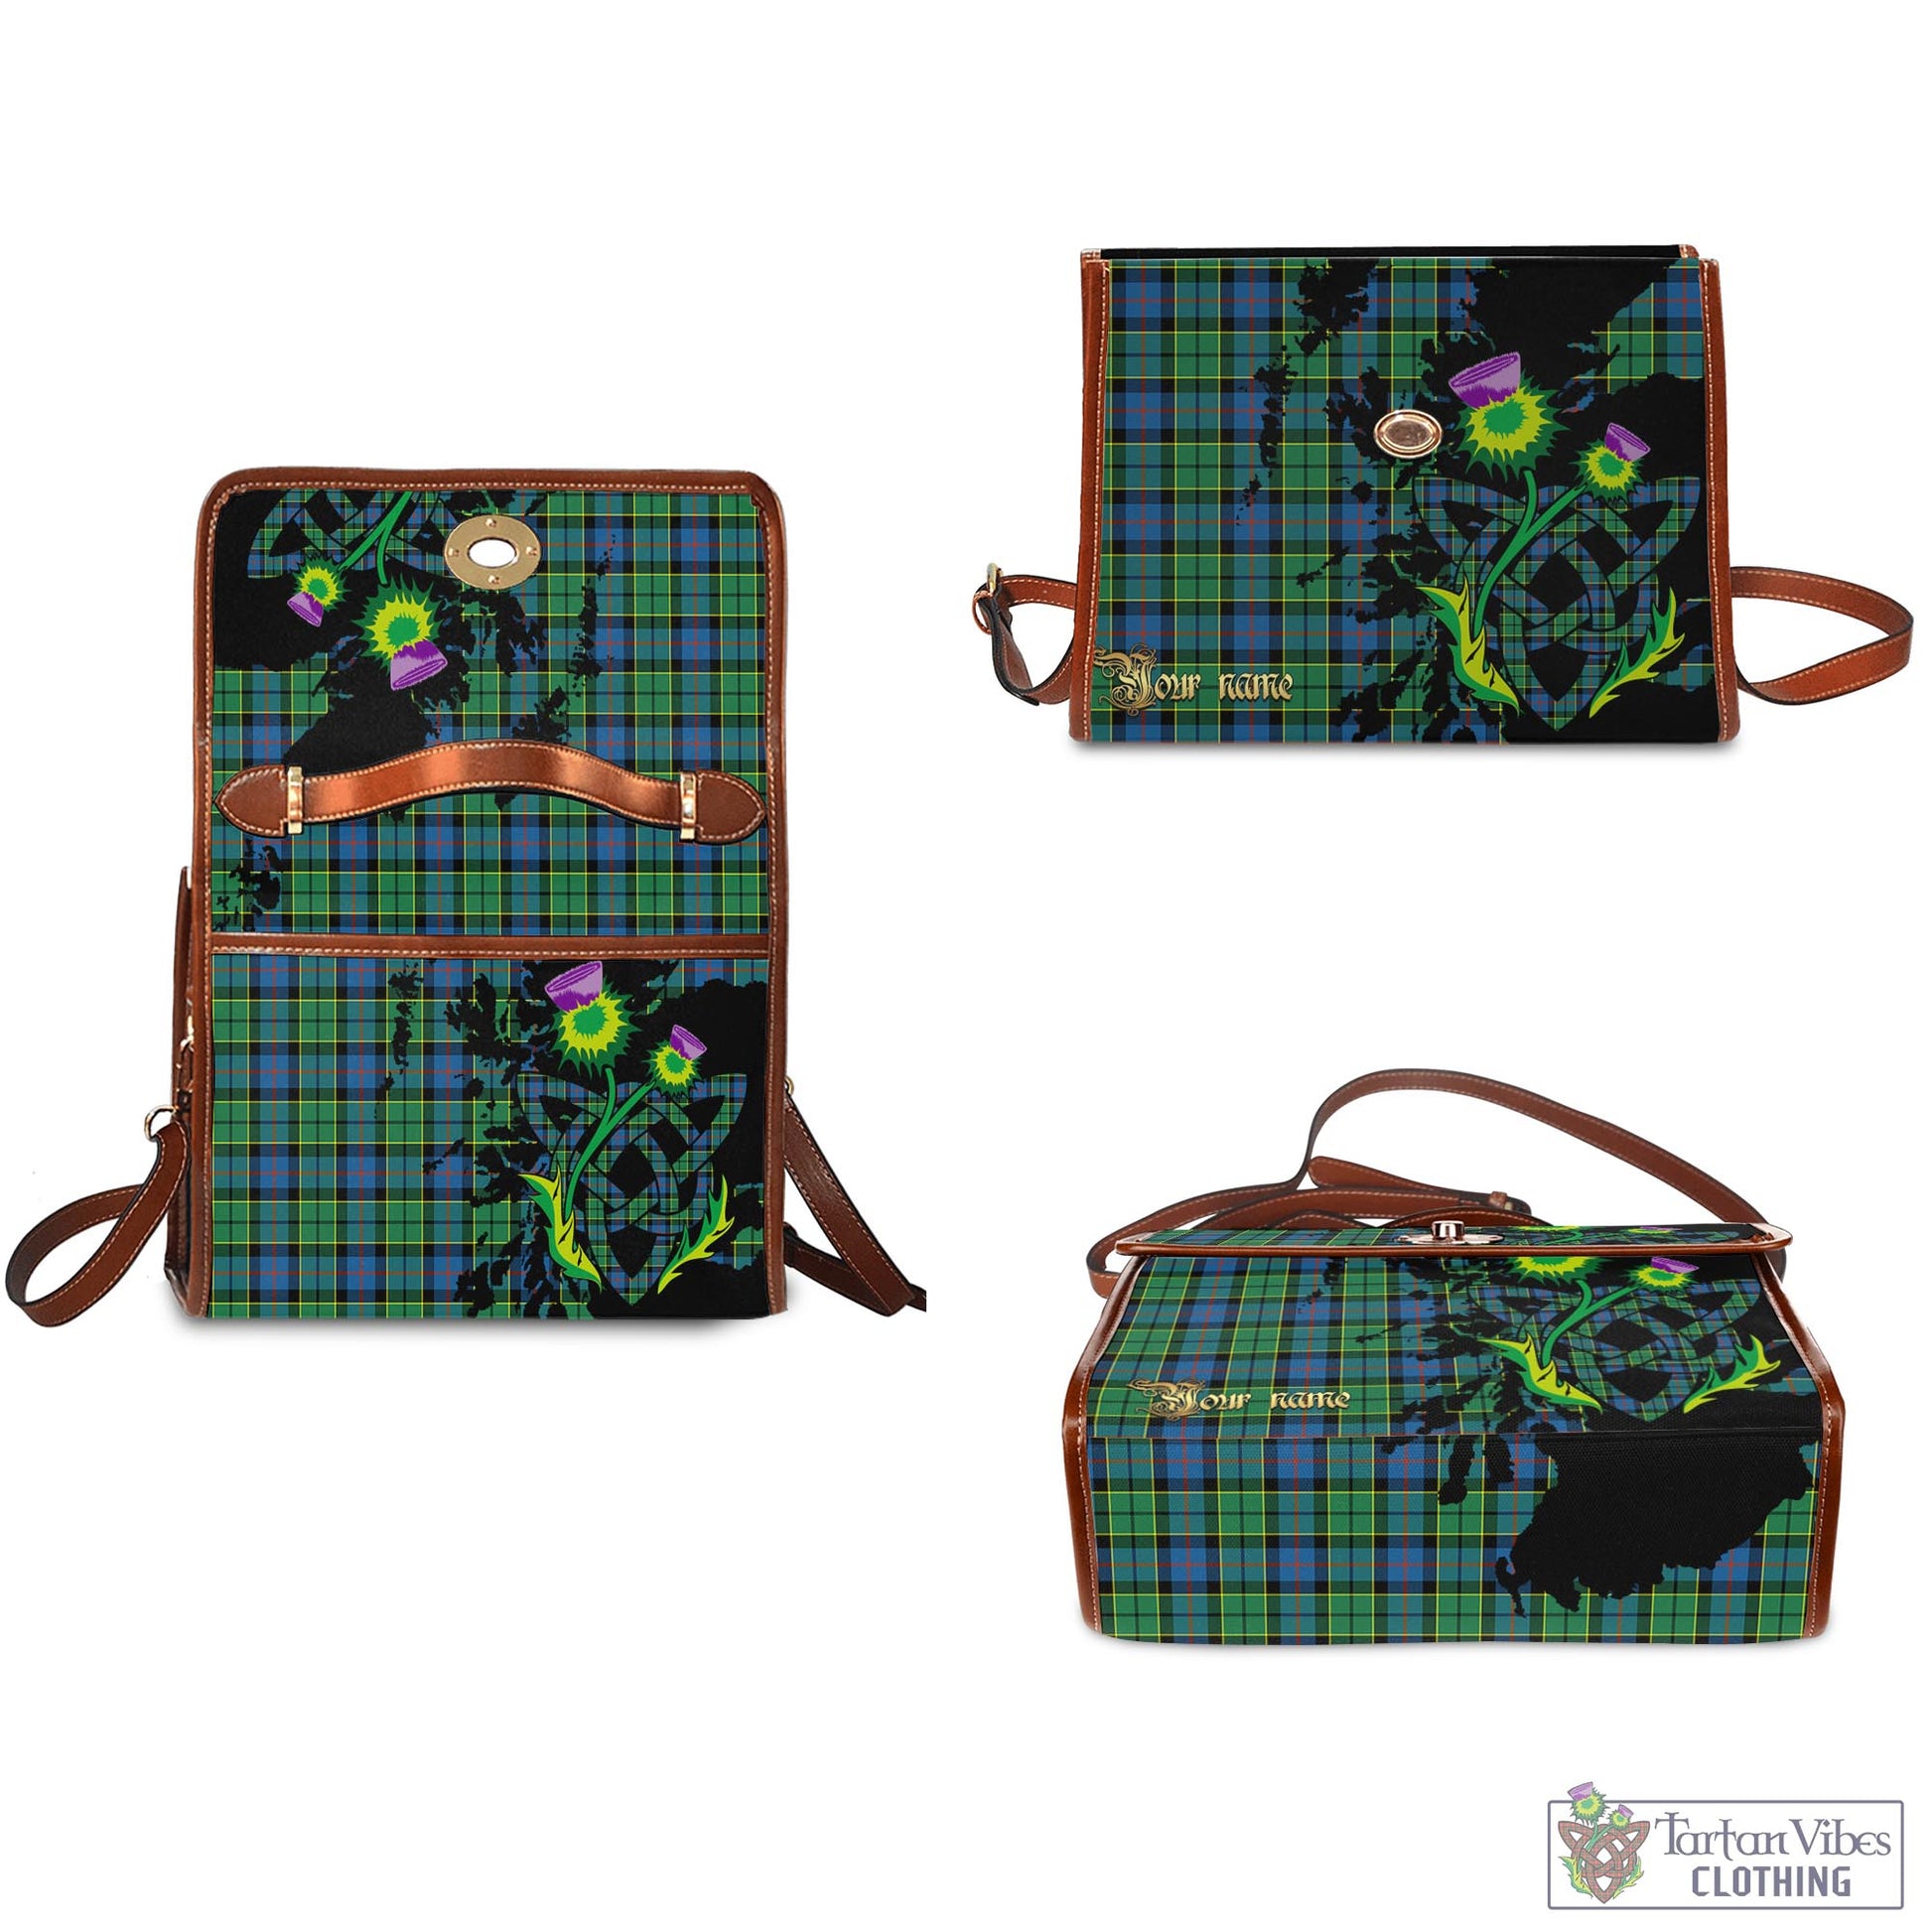 Tartan Vibes Clothing Forsyth Ancient Tartan Waterproof Canvas Bag with Scotland Map and Thistle Celtic Accents